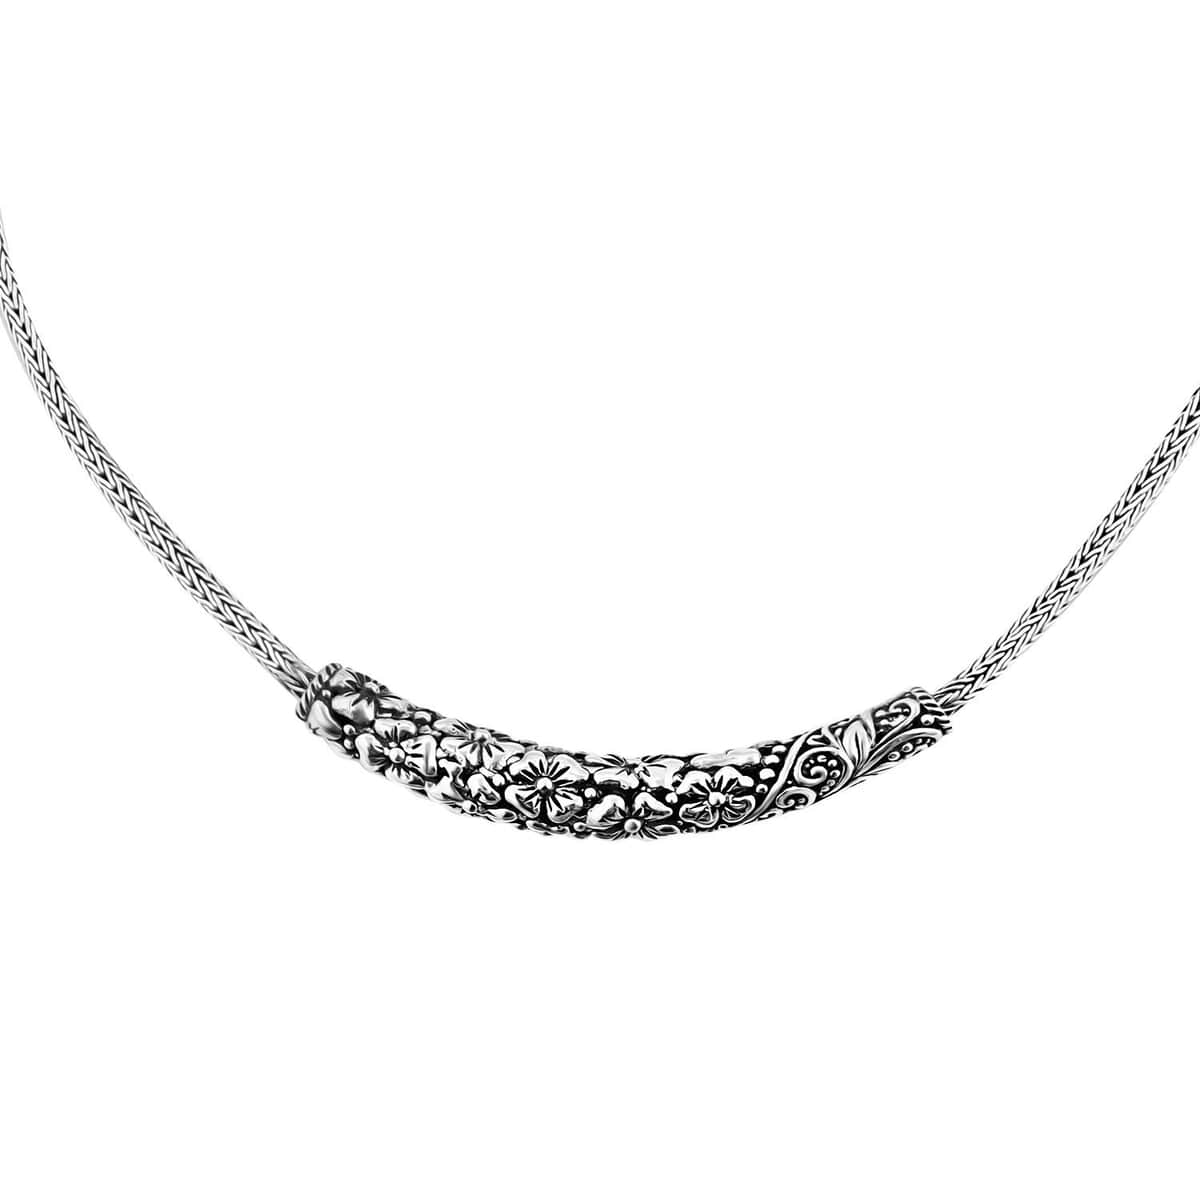 Bali Legacy Sterling Silver Frangipani with Filigree Necklace 18-19 Inches 21 Grams image number 3